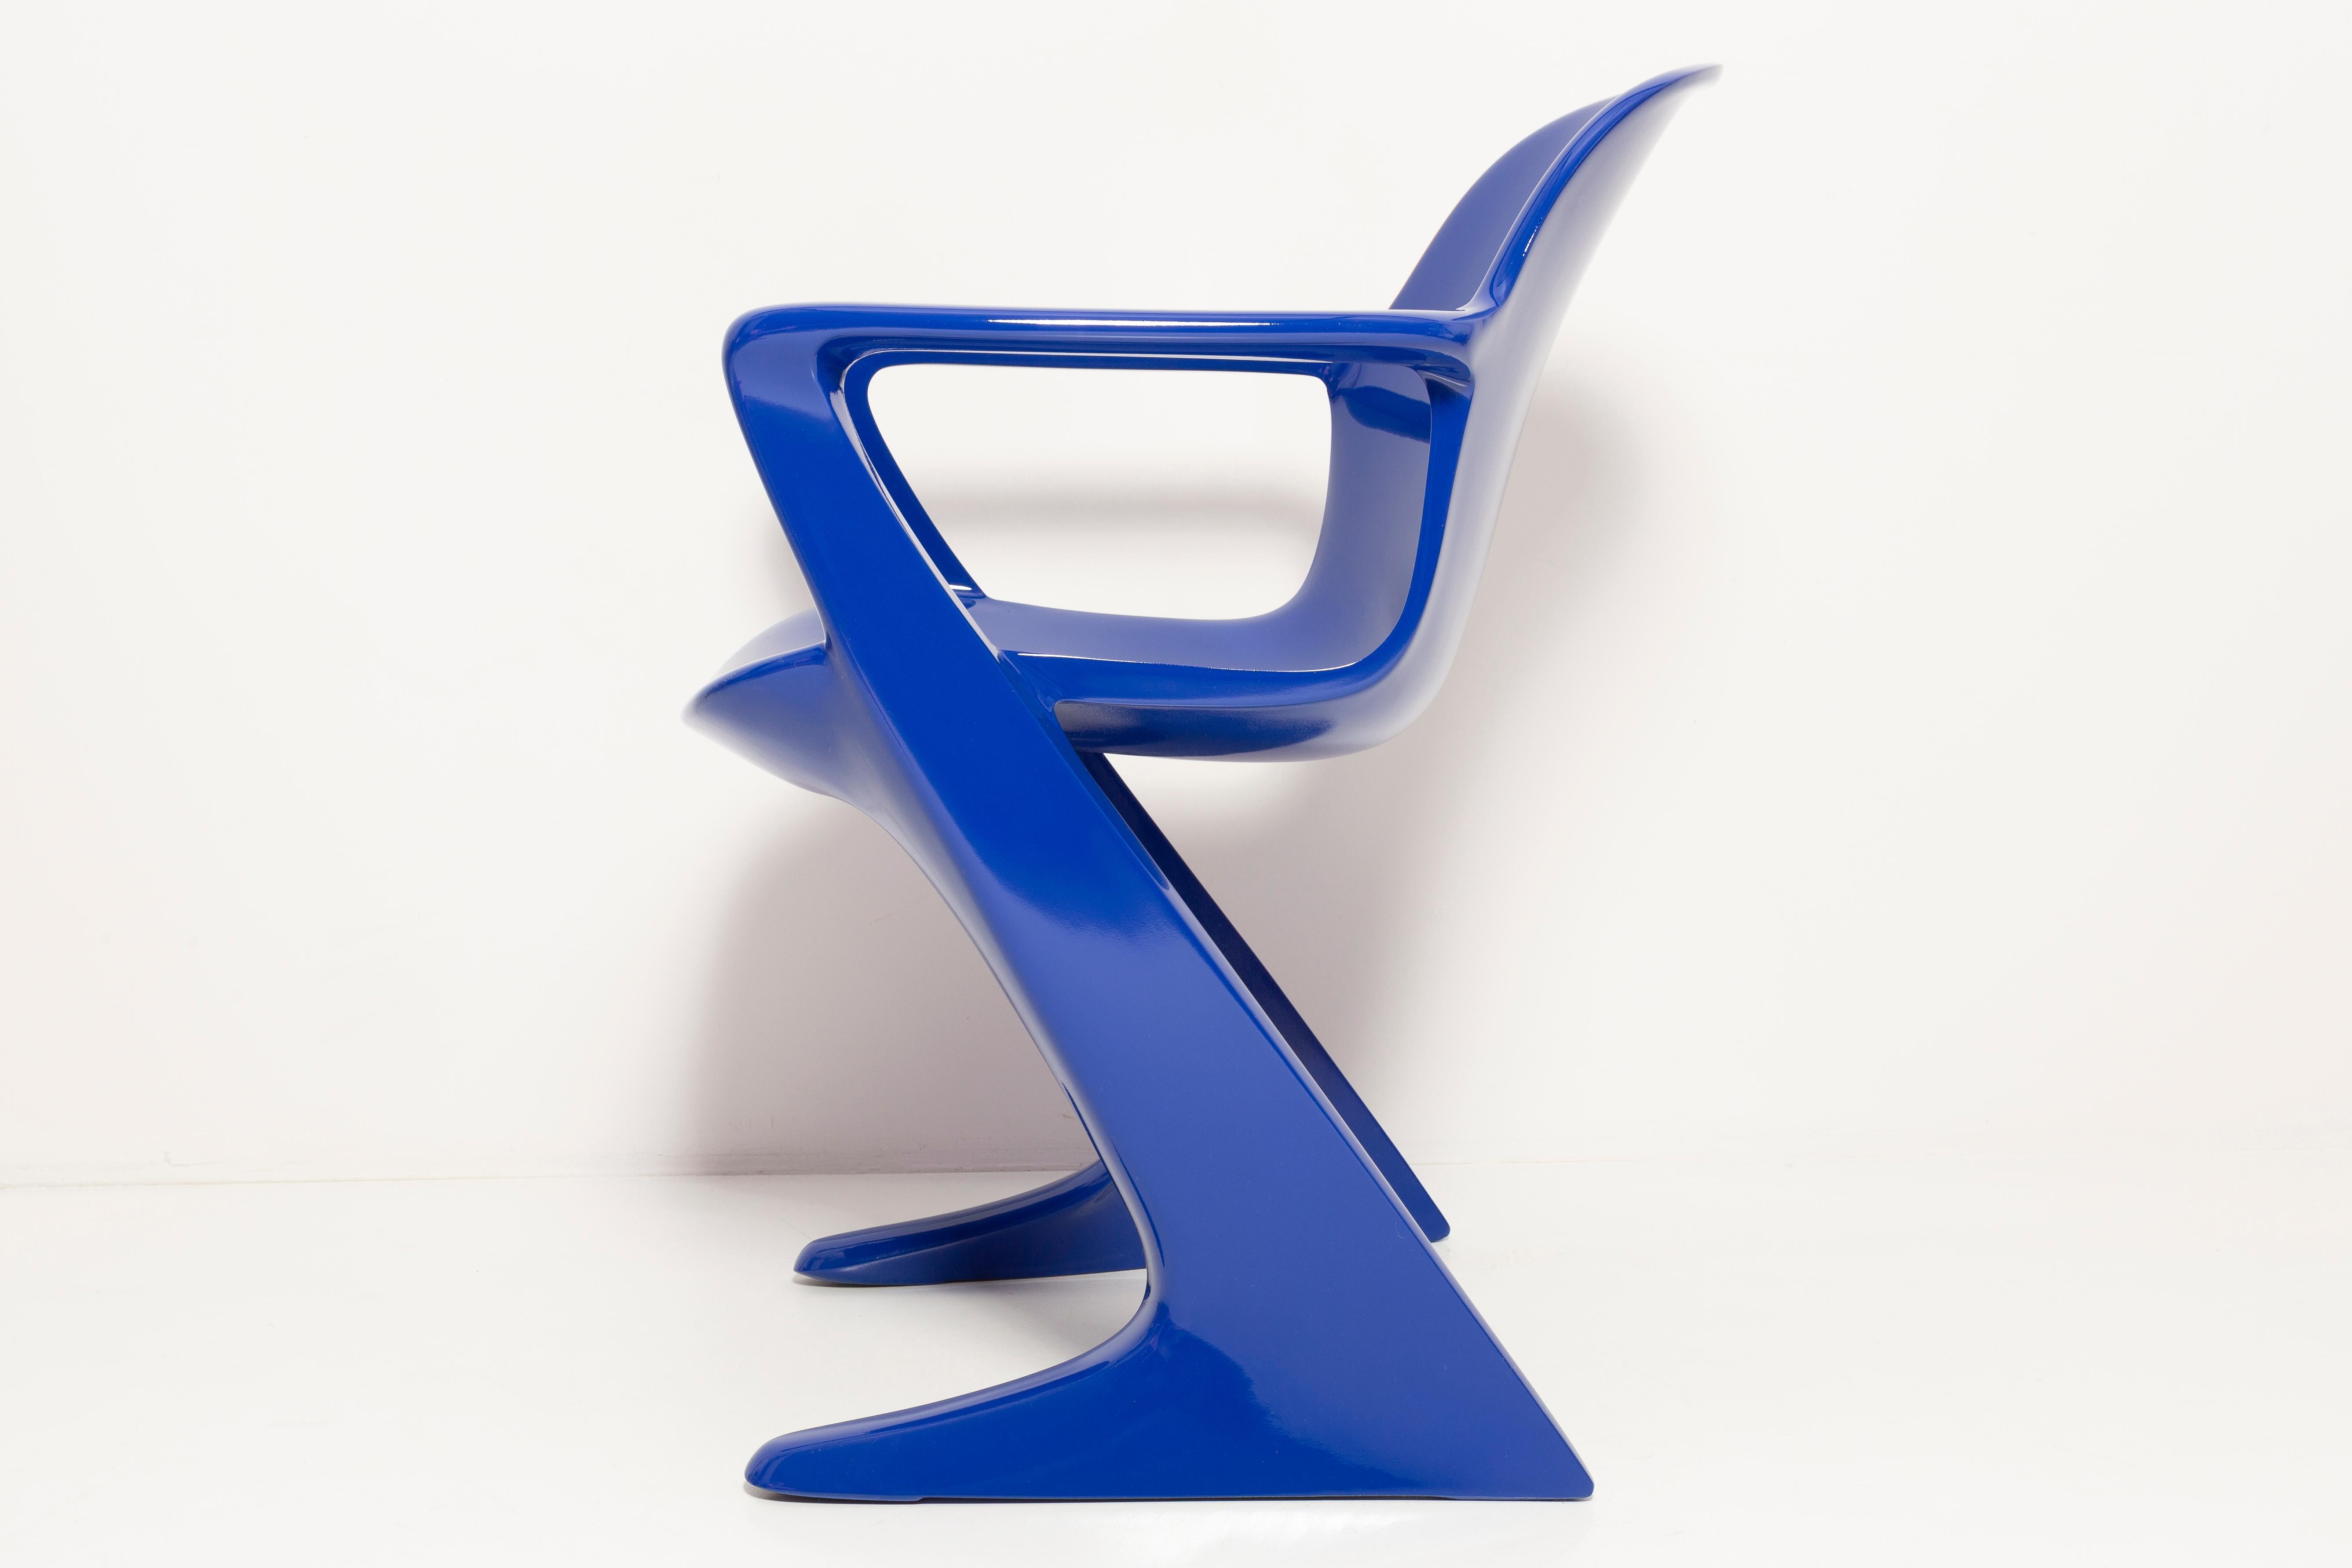 Set of Eight Ultramarine Blue Kangaroo Chairs, by Ernst Moeckl, Germany, 1968 For Sale 1